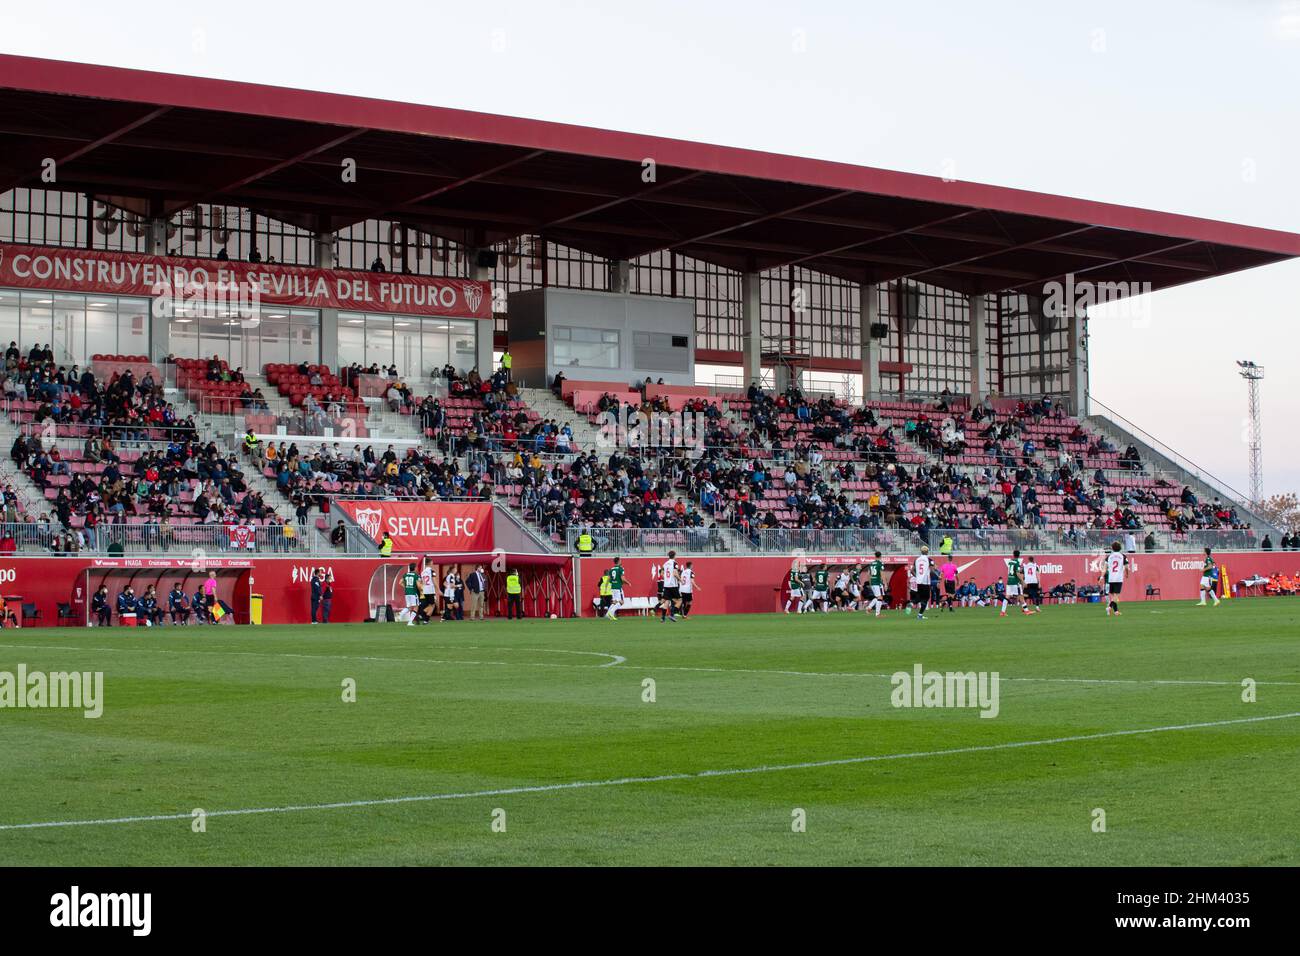 Seville, Spain. 06th Feb, 2022. Football fans seen on the stand of the  Jesus Navas Stadium during the Primera RFEF match between Sevilla Atletico  and CD Castellon in Seville. (Photo credit: Mario